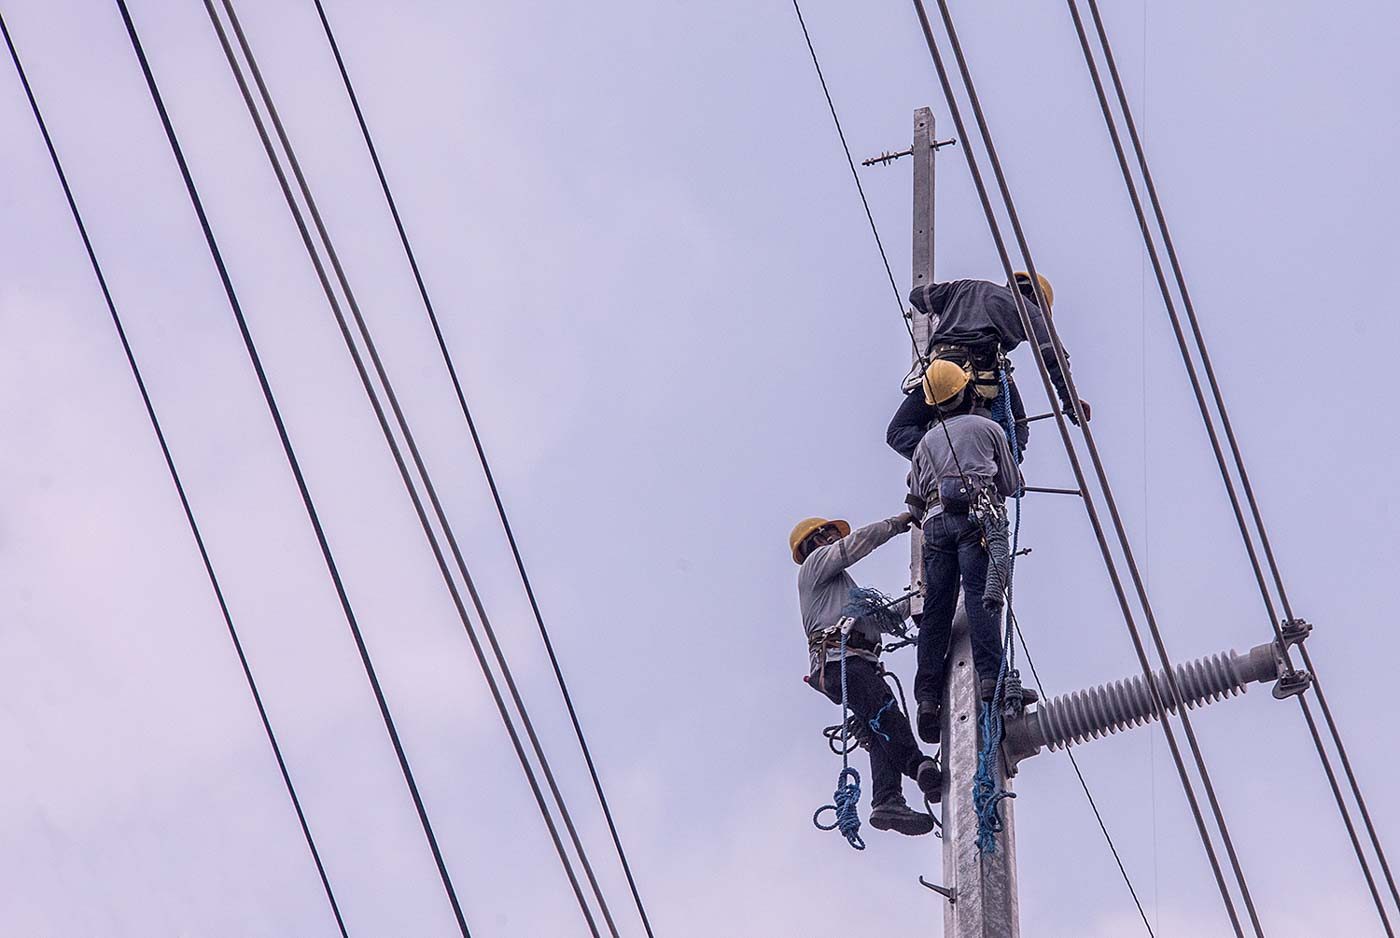 Luzon grid on red alert, rotational brownouts possible